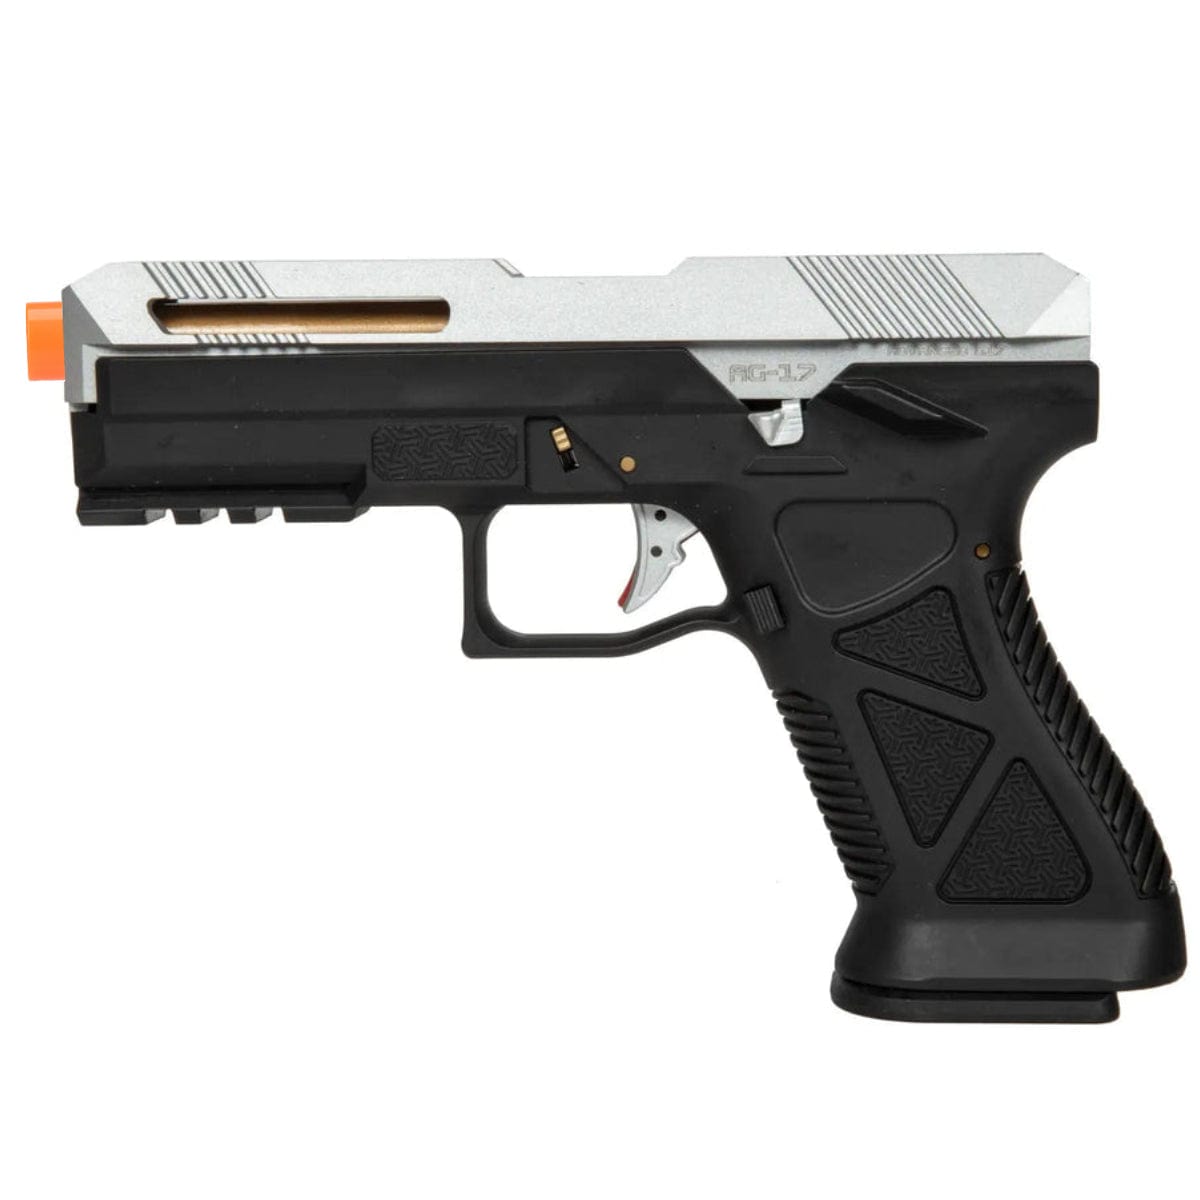 Airsportinggoods HFC HG182 AG17 SCORPION GAS AIRSOFT PISTOL SILVER